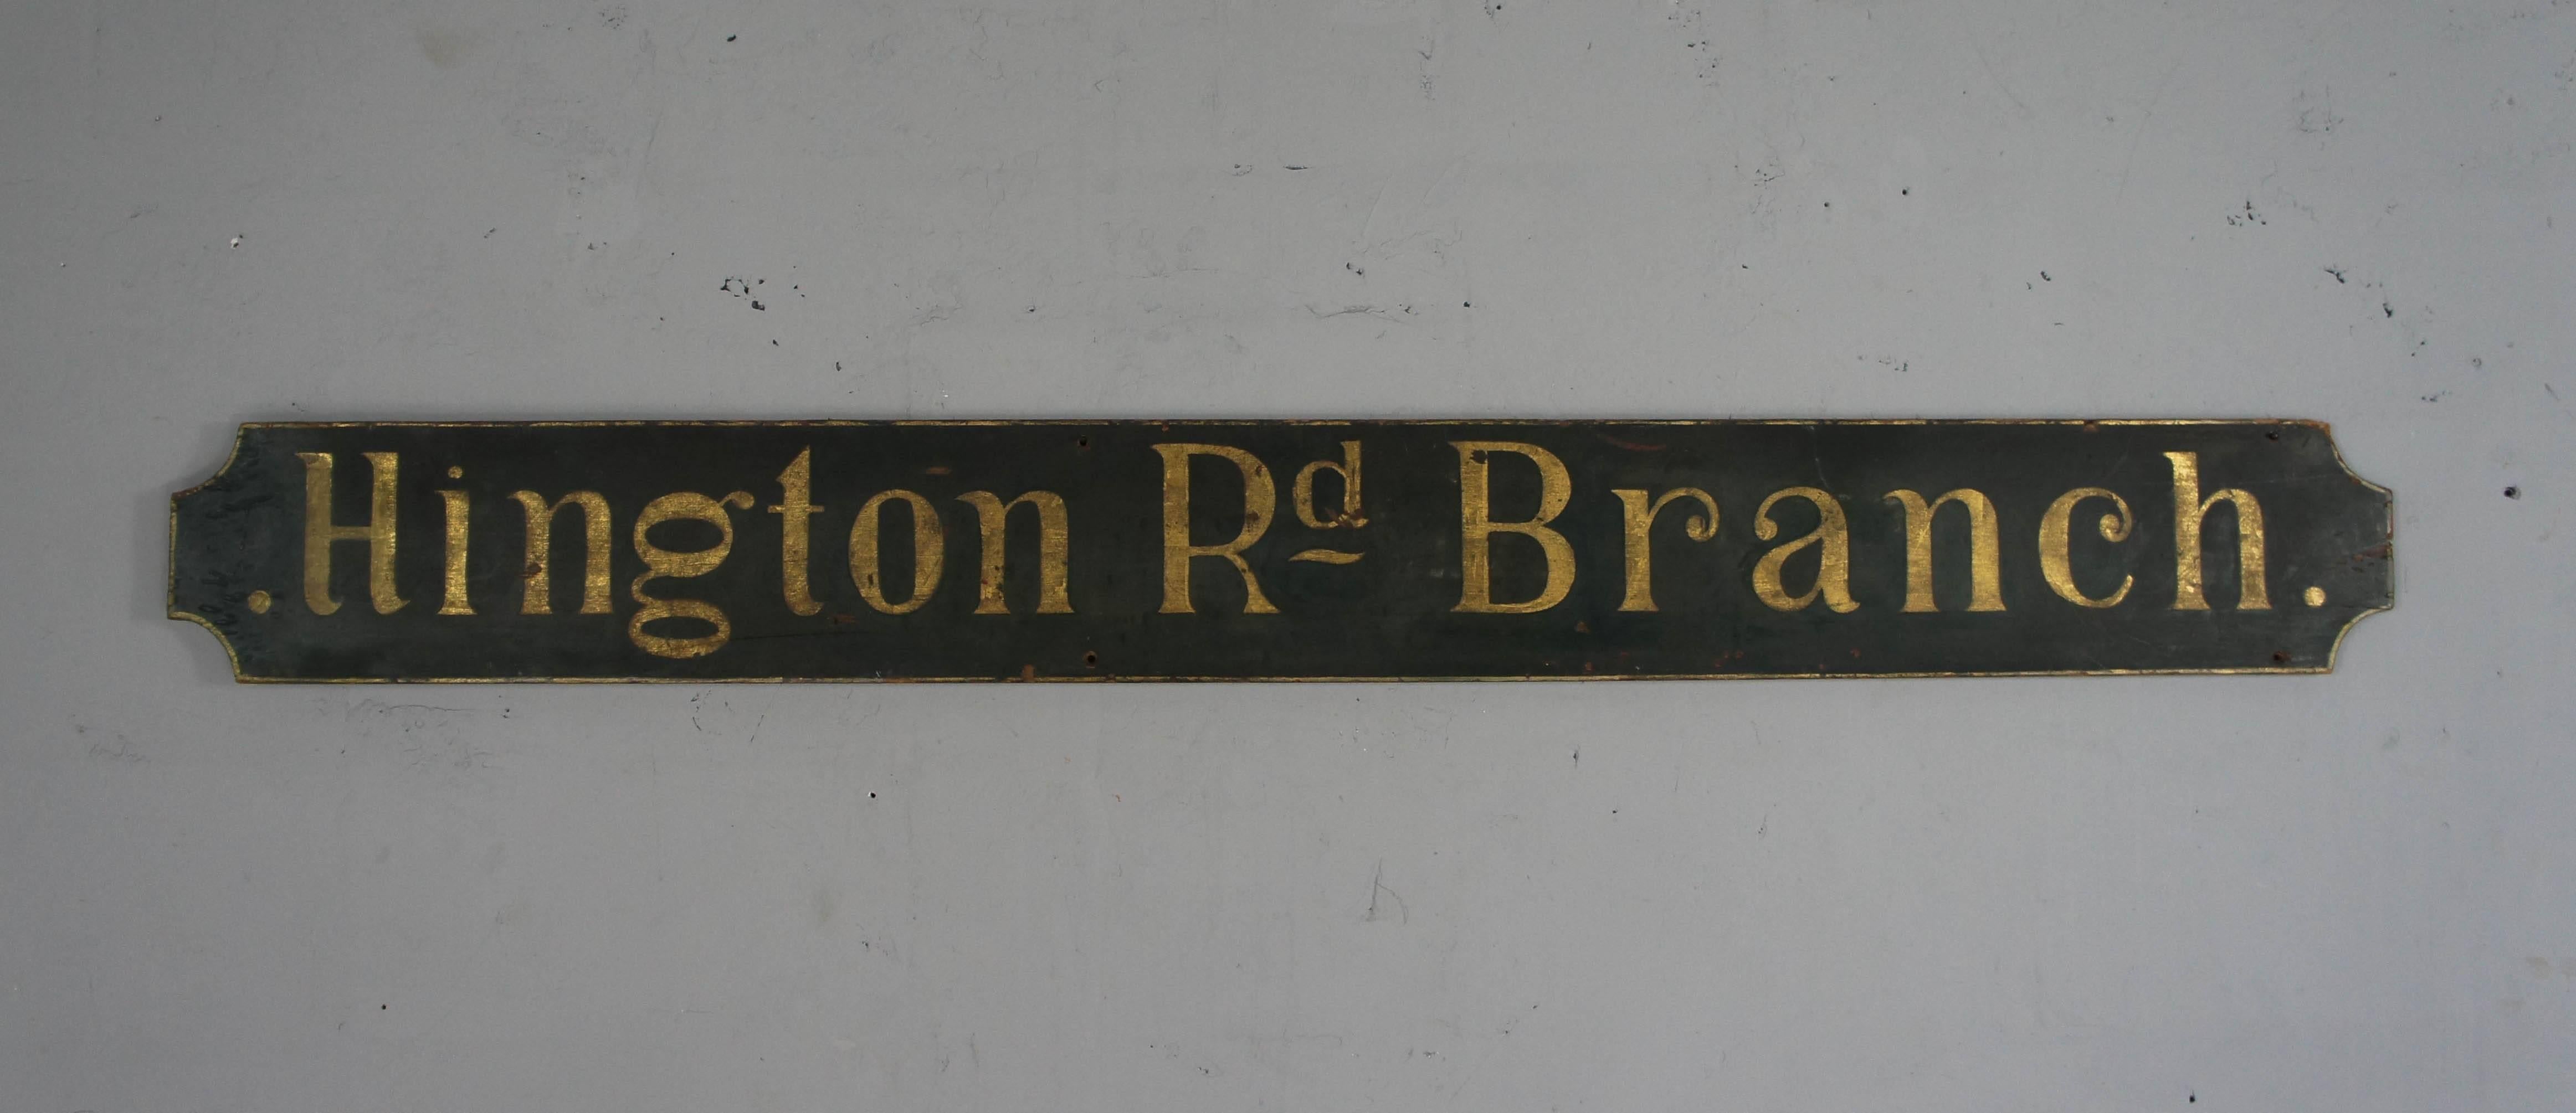 Great looking wooden sign advertising Hington Road Branch. Dark green almost black background, with gold lettering and border. Perfect piece for interior styling.